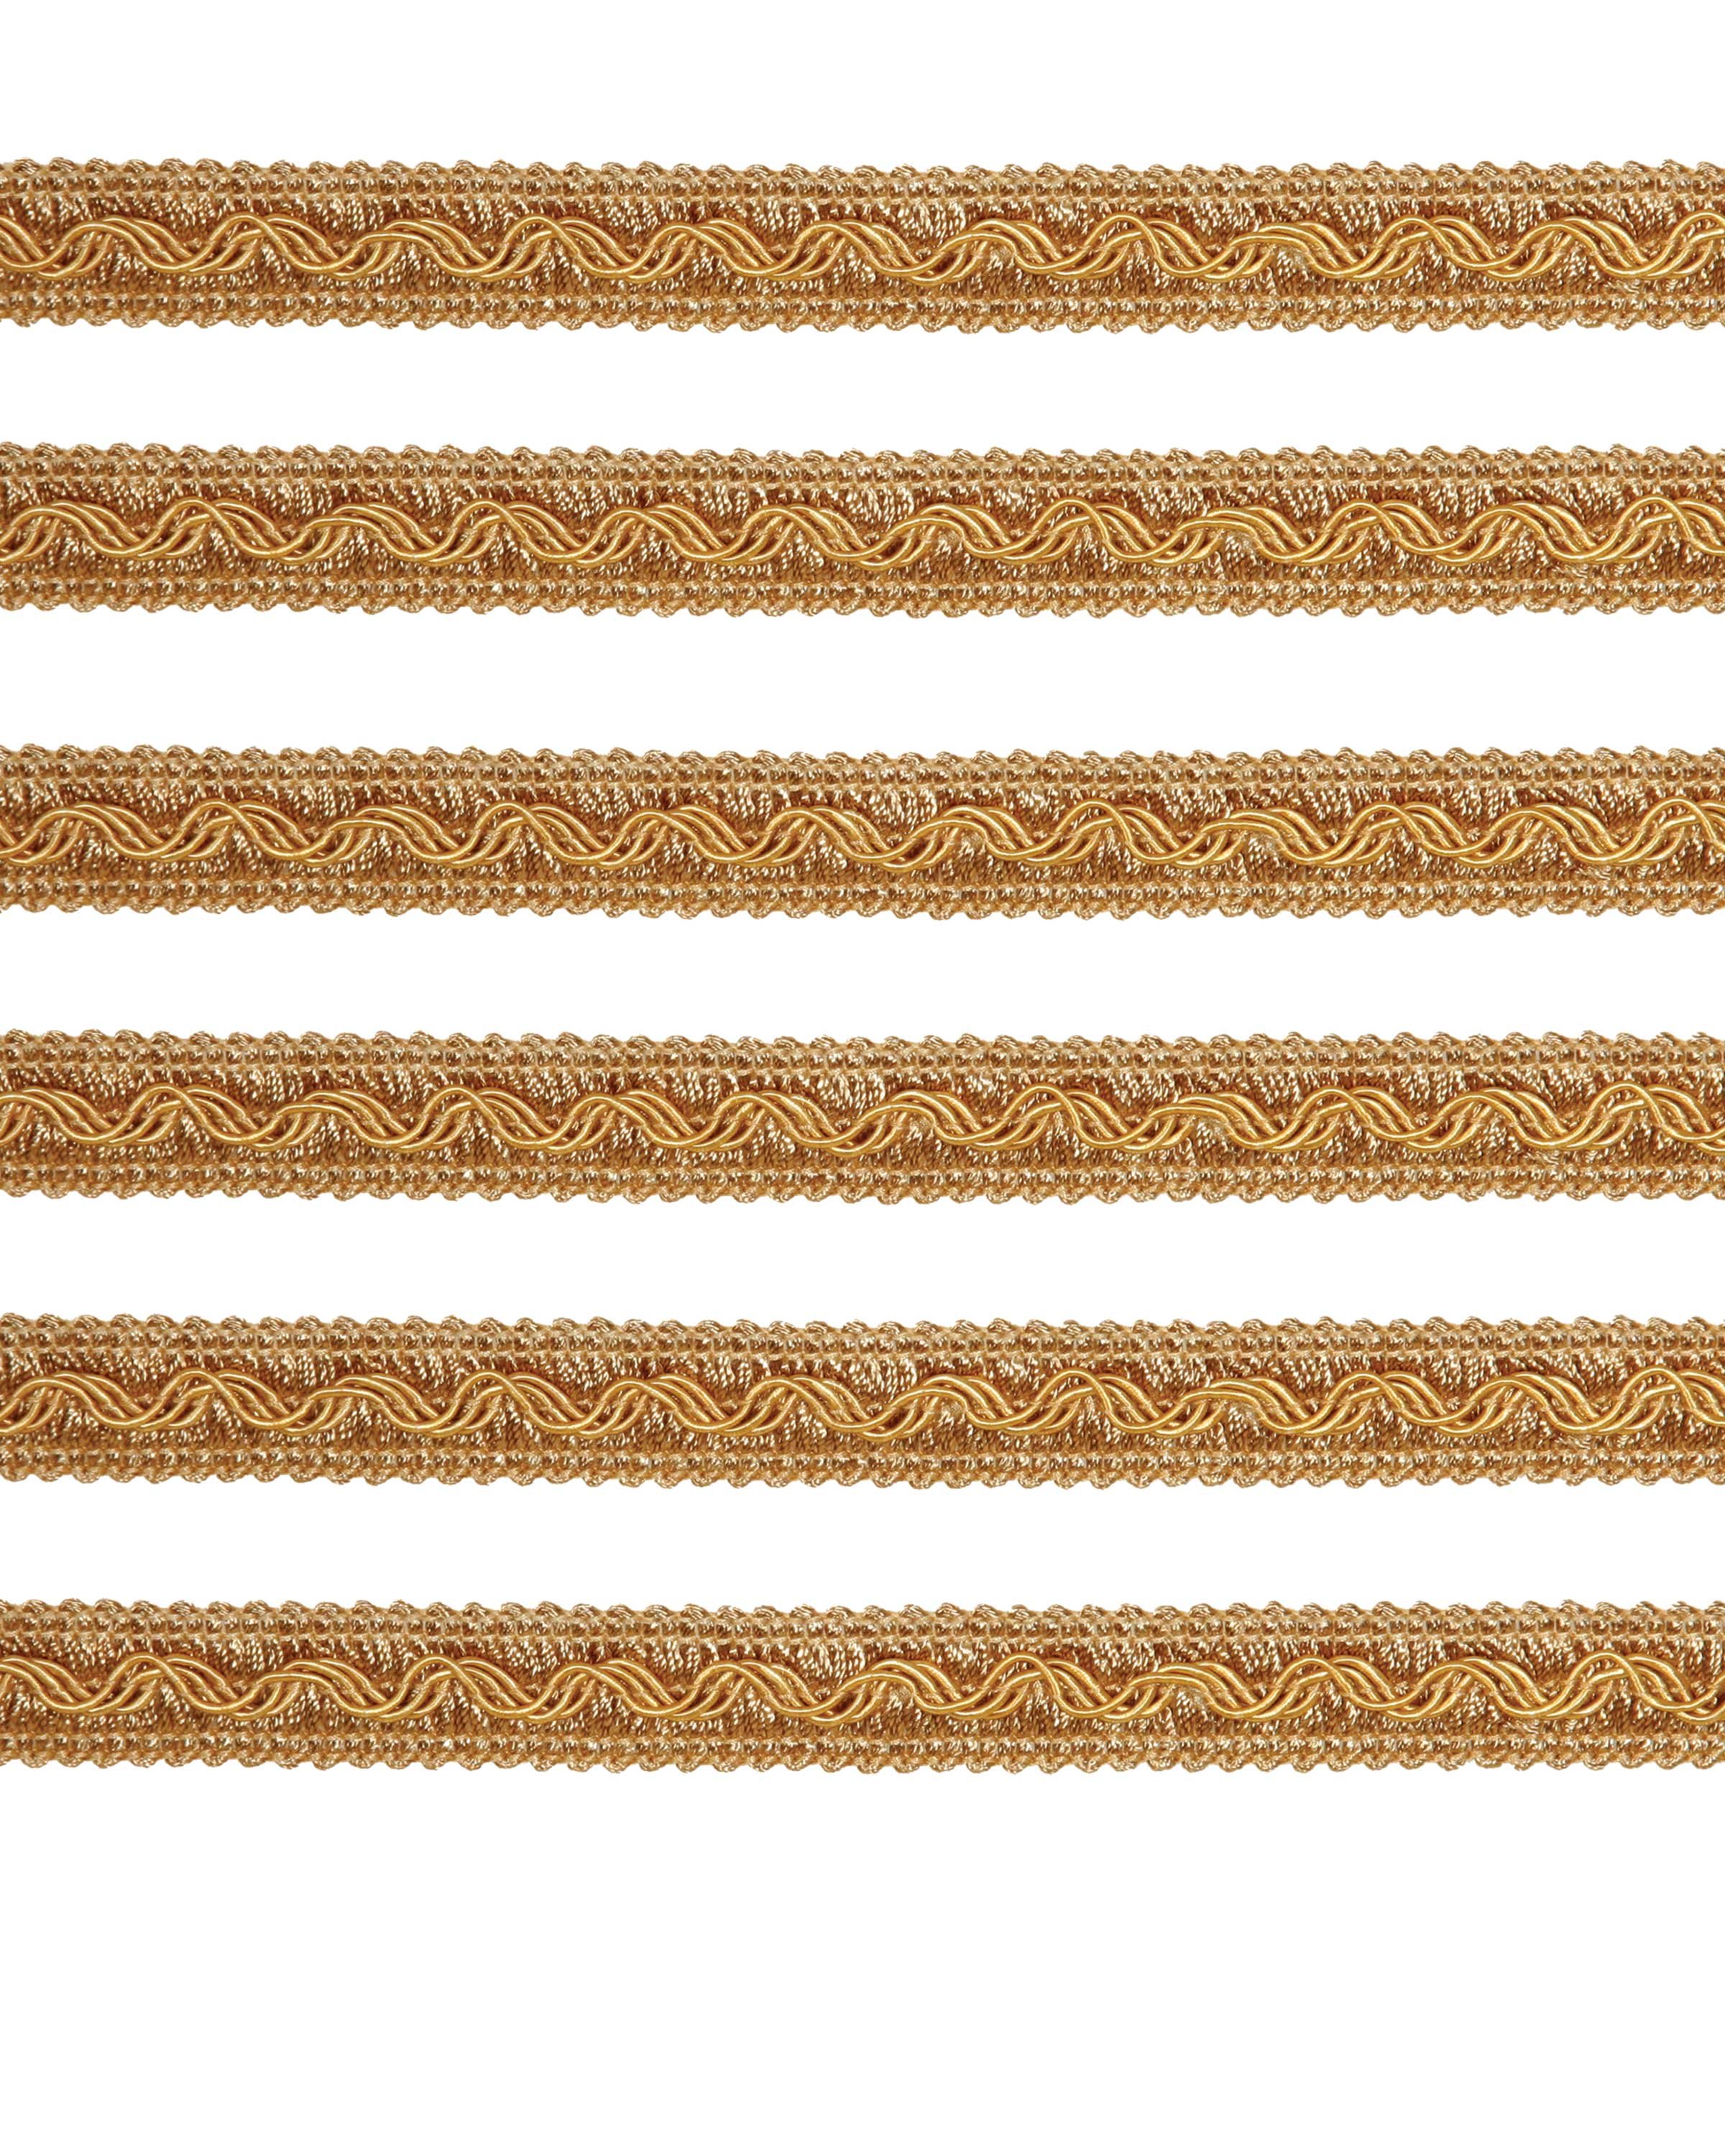 Fancy Braid - Gold 17mm Price is for 5 metres